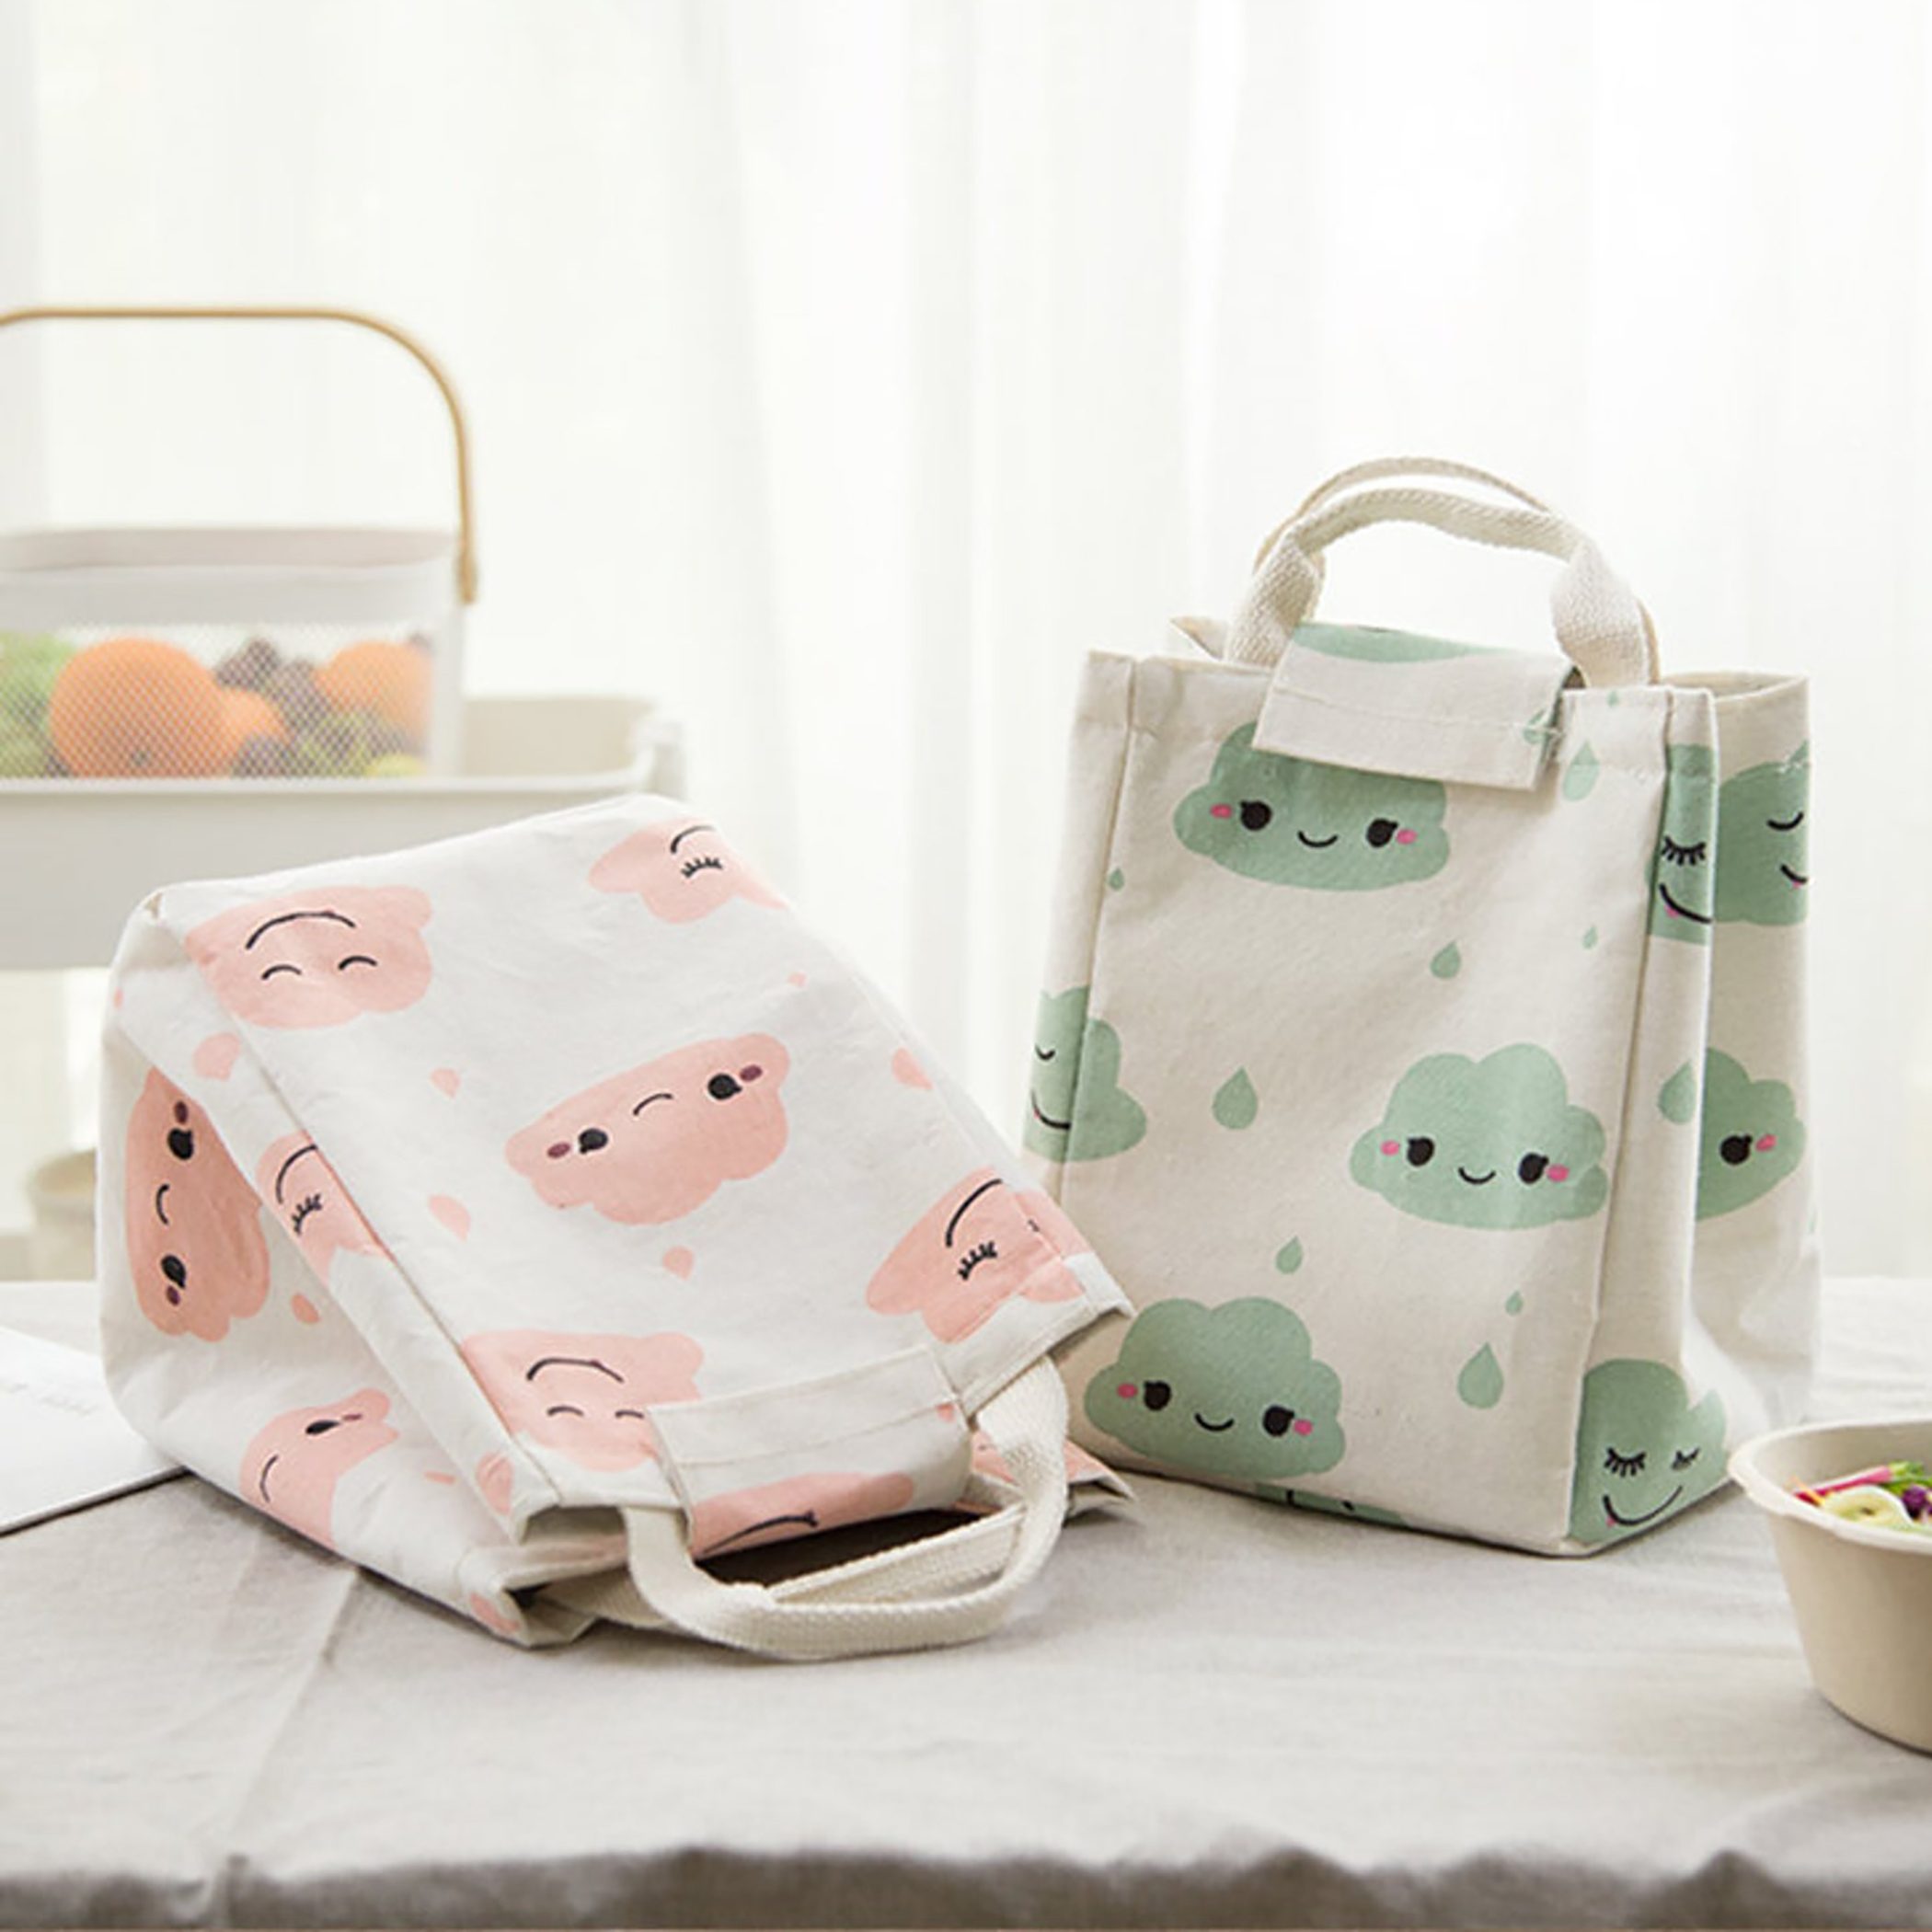 Kids Insulated Lunch Bag Online